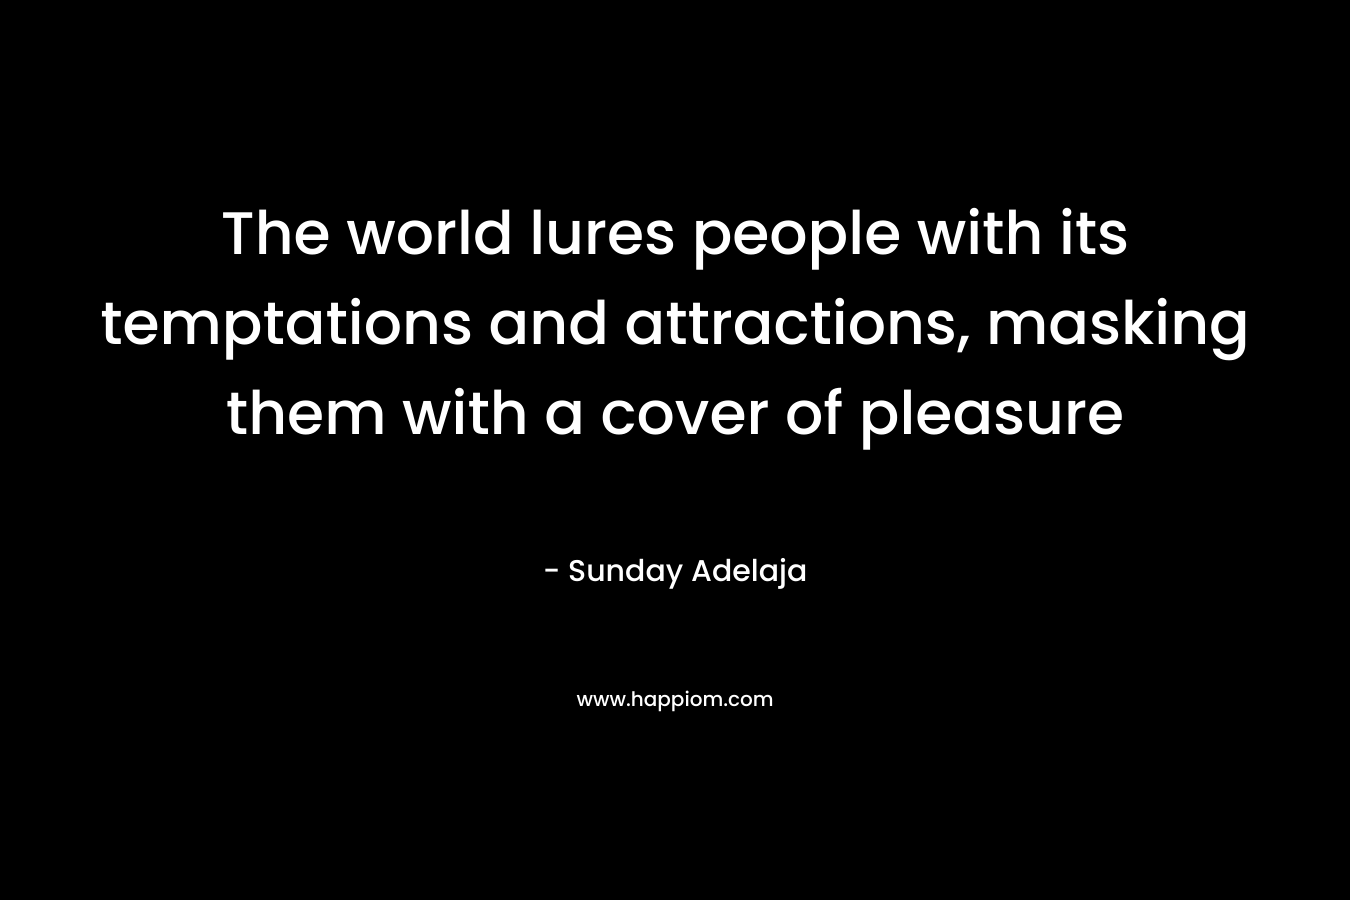 The world lures people with its temptations and attractions, masking them with a cover of pleasure – Sunday Adelaja